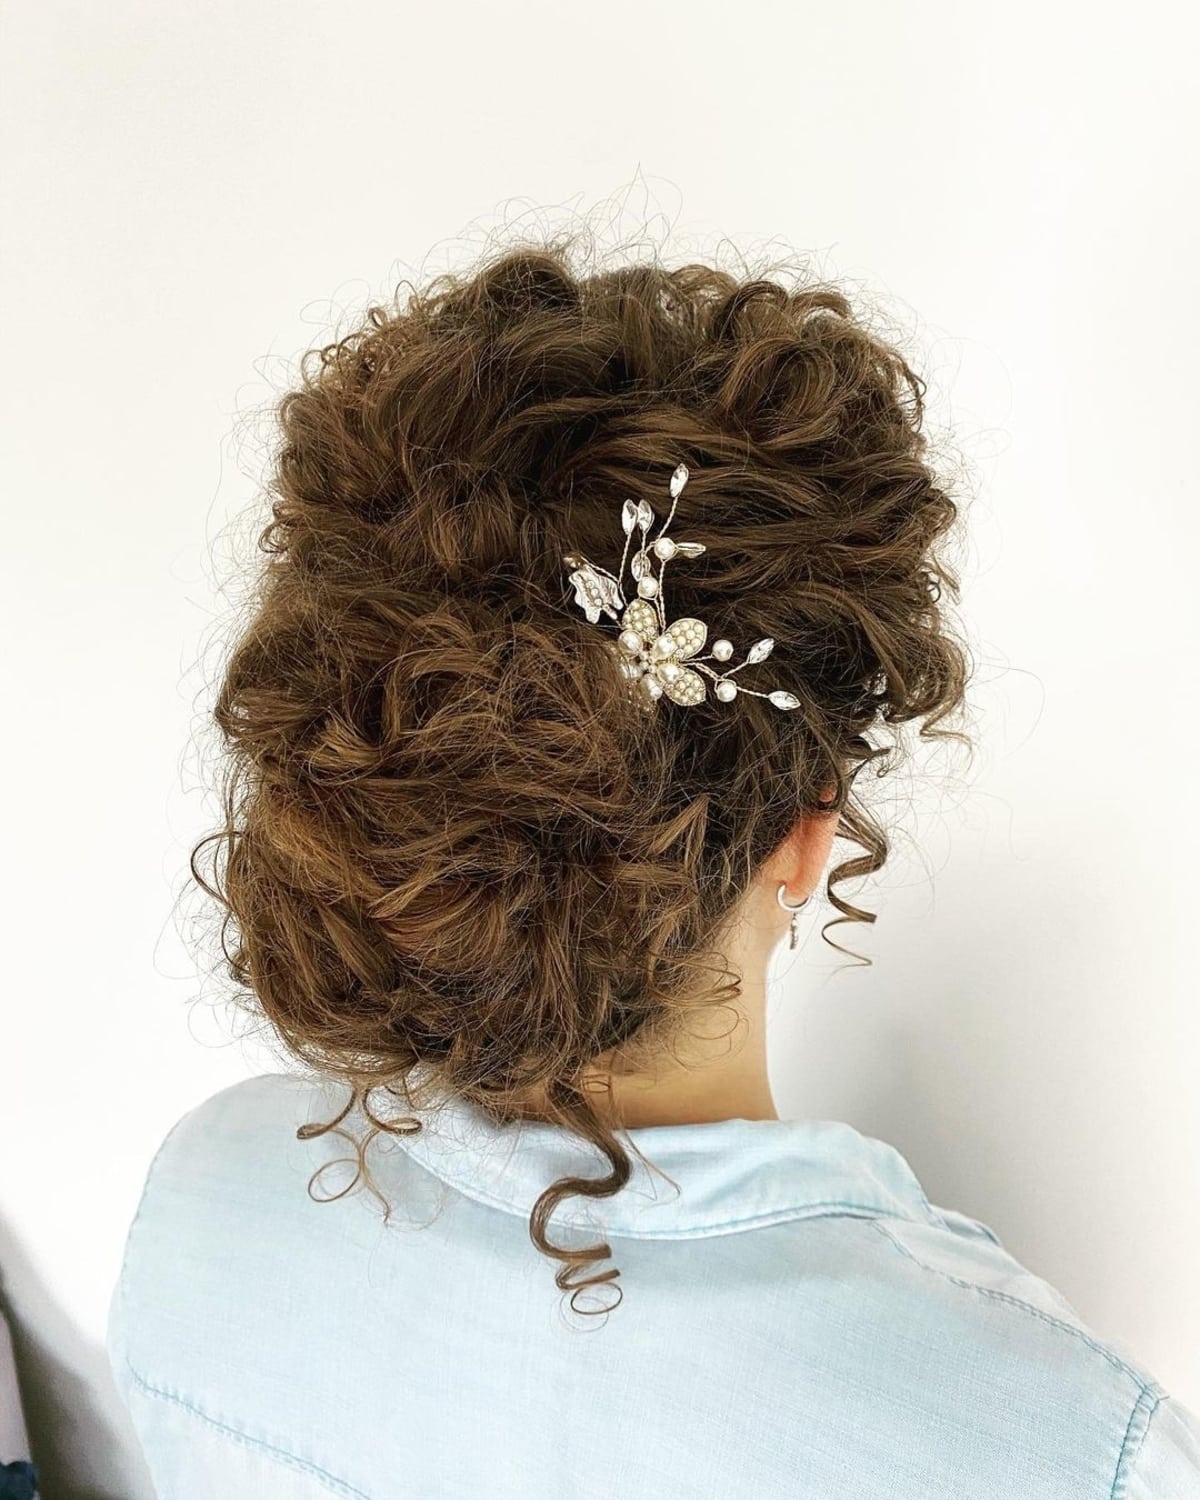 21 Gorgeous Bridesmaid Hairstyles for The Brides Big Day